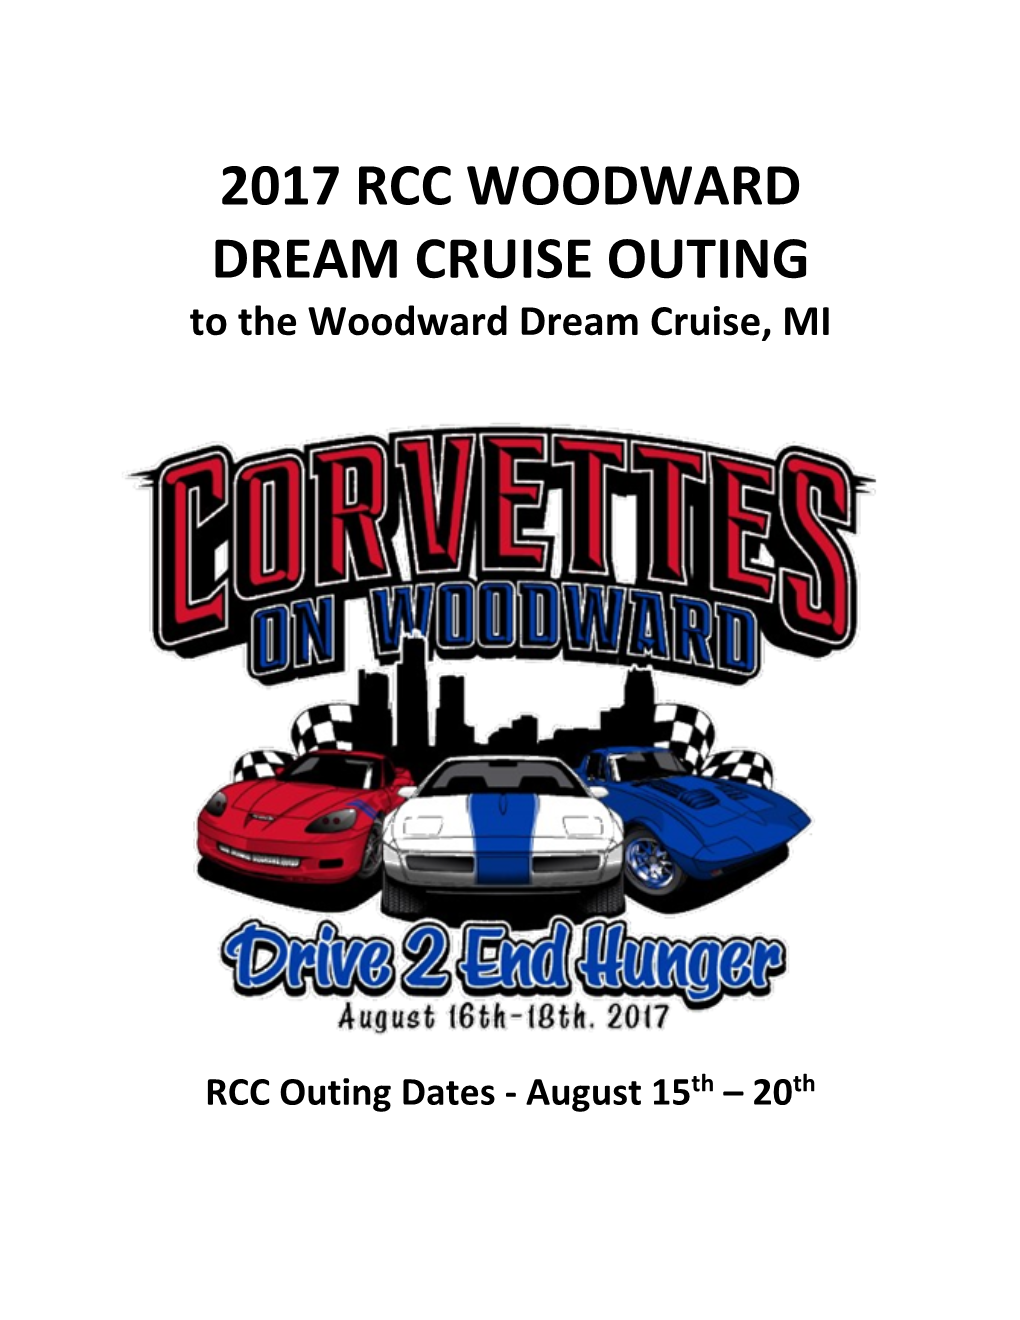 2017 RCC WOODWARD DREAM CRUISE OUTING to the Woodward Dream Cruise, MI